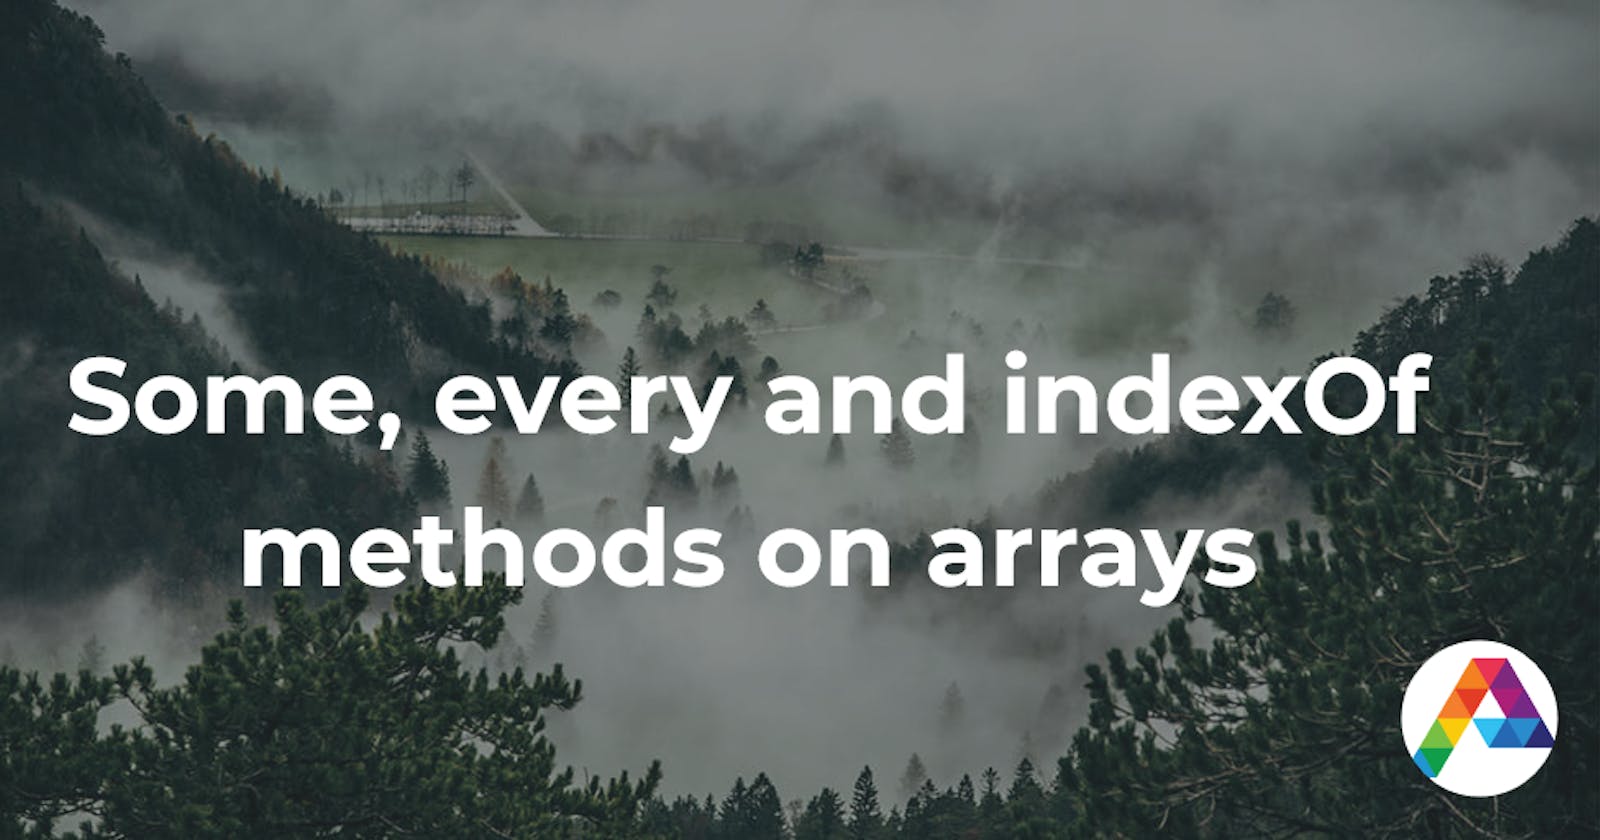 Some, every and indexOf methods on arrays